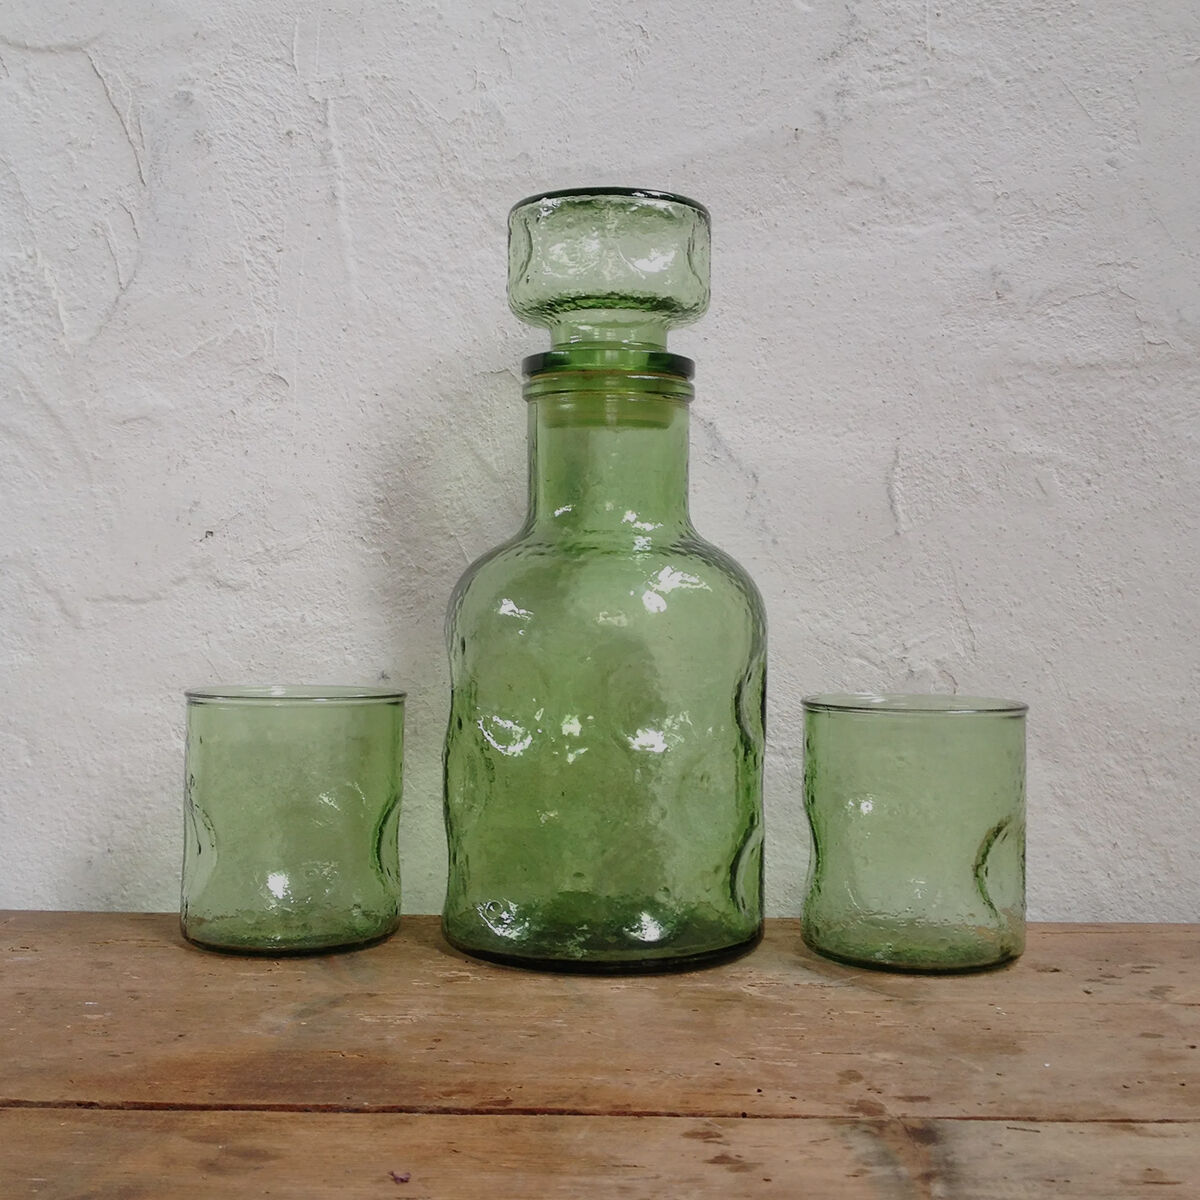 MORE GREEN GLASS CARAFES